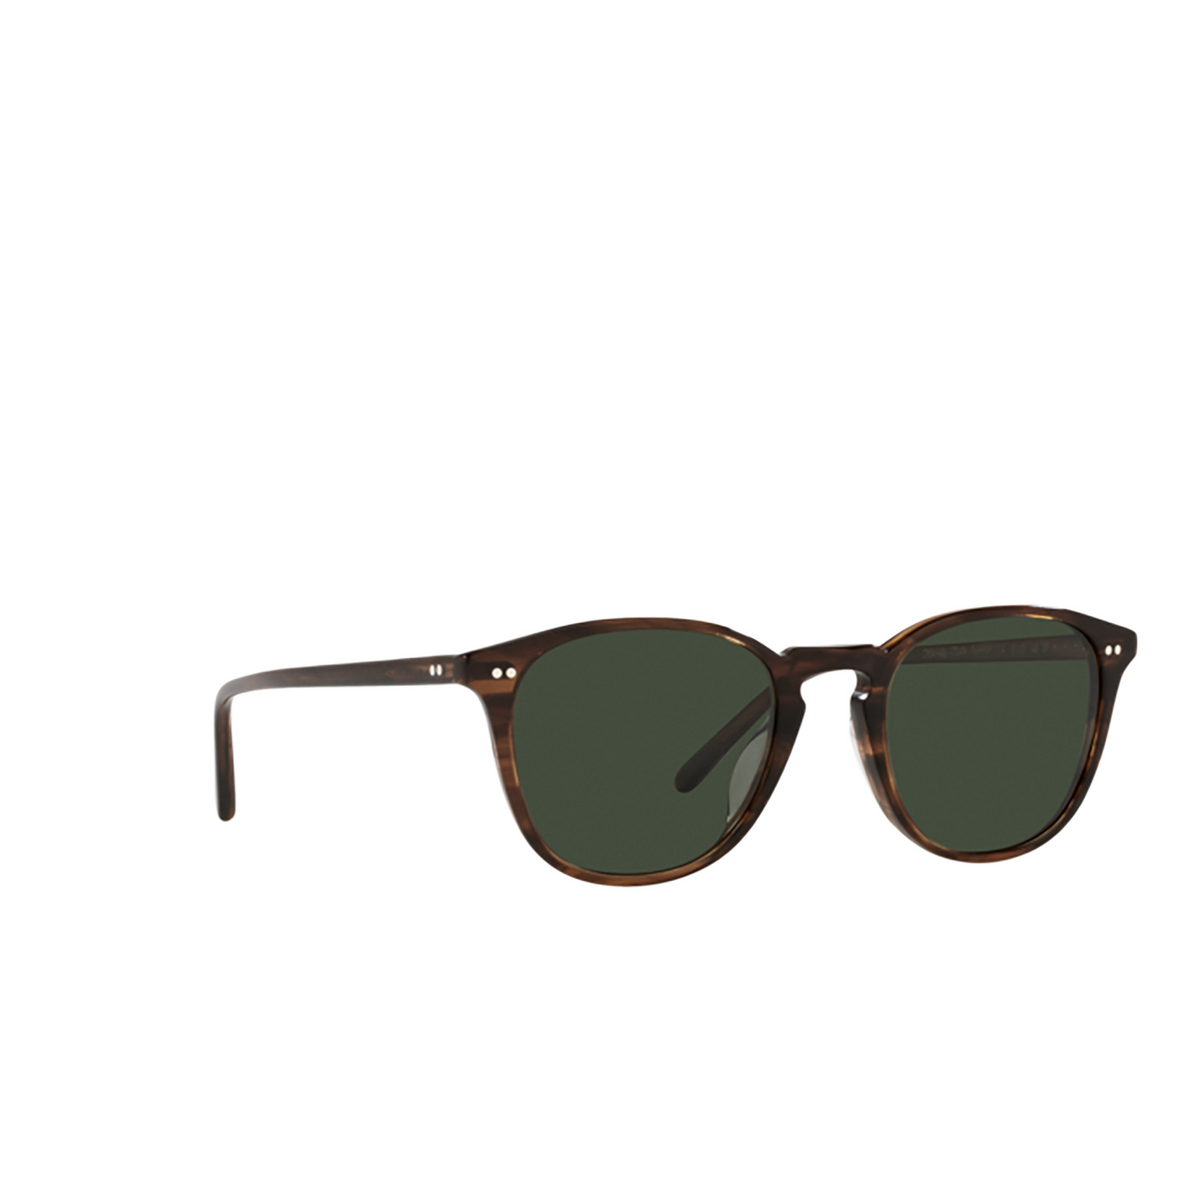 Oliver Peoples FORMAN L.A Sunglasses 17249A Tuscany Tortoise - three-quarters view